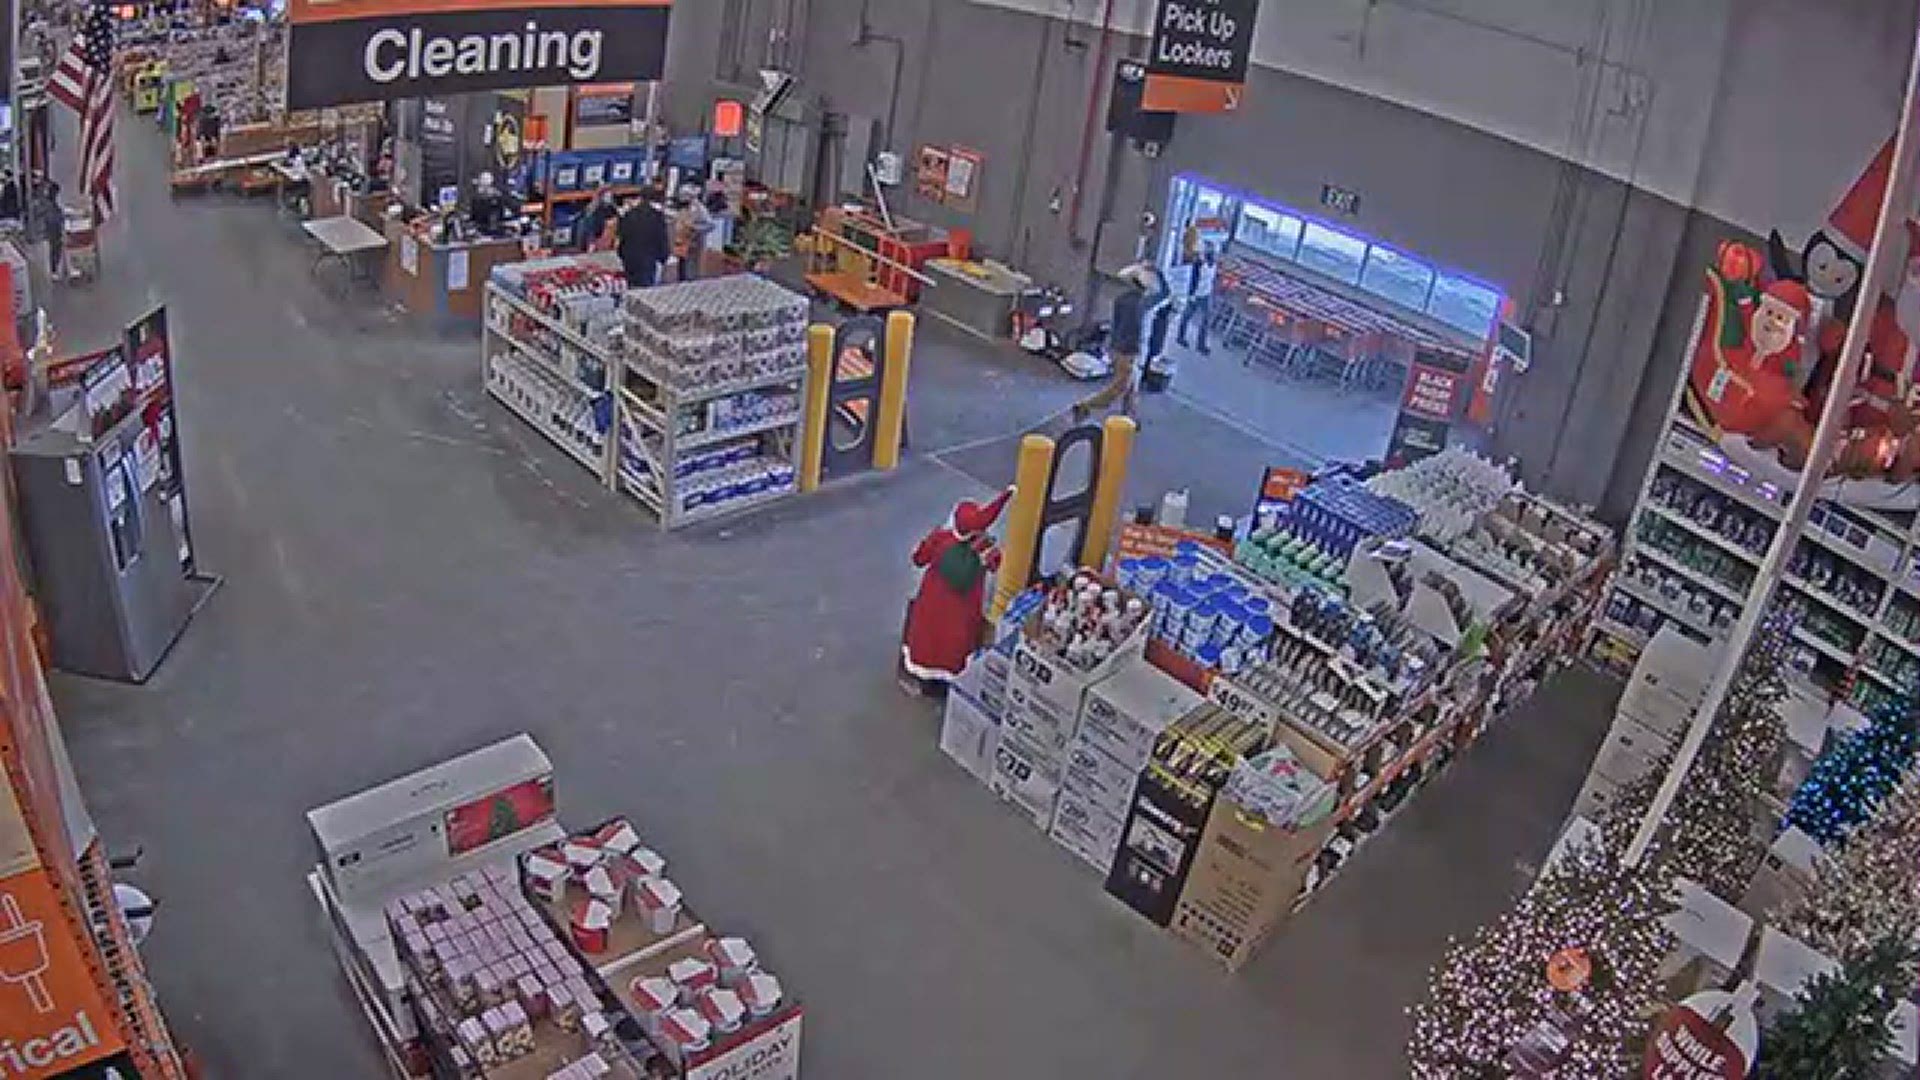 The incident happened at around 3:30 p.m. on Nov. 10 at the Home Depot in Golden. Anyone with information should call Metro Denver Crime Stoppers at 720-913-STOP.